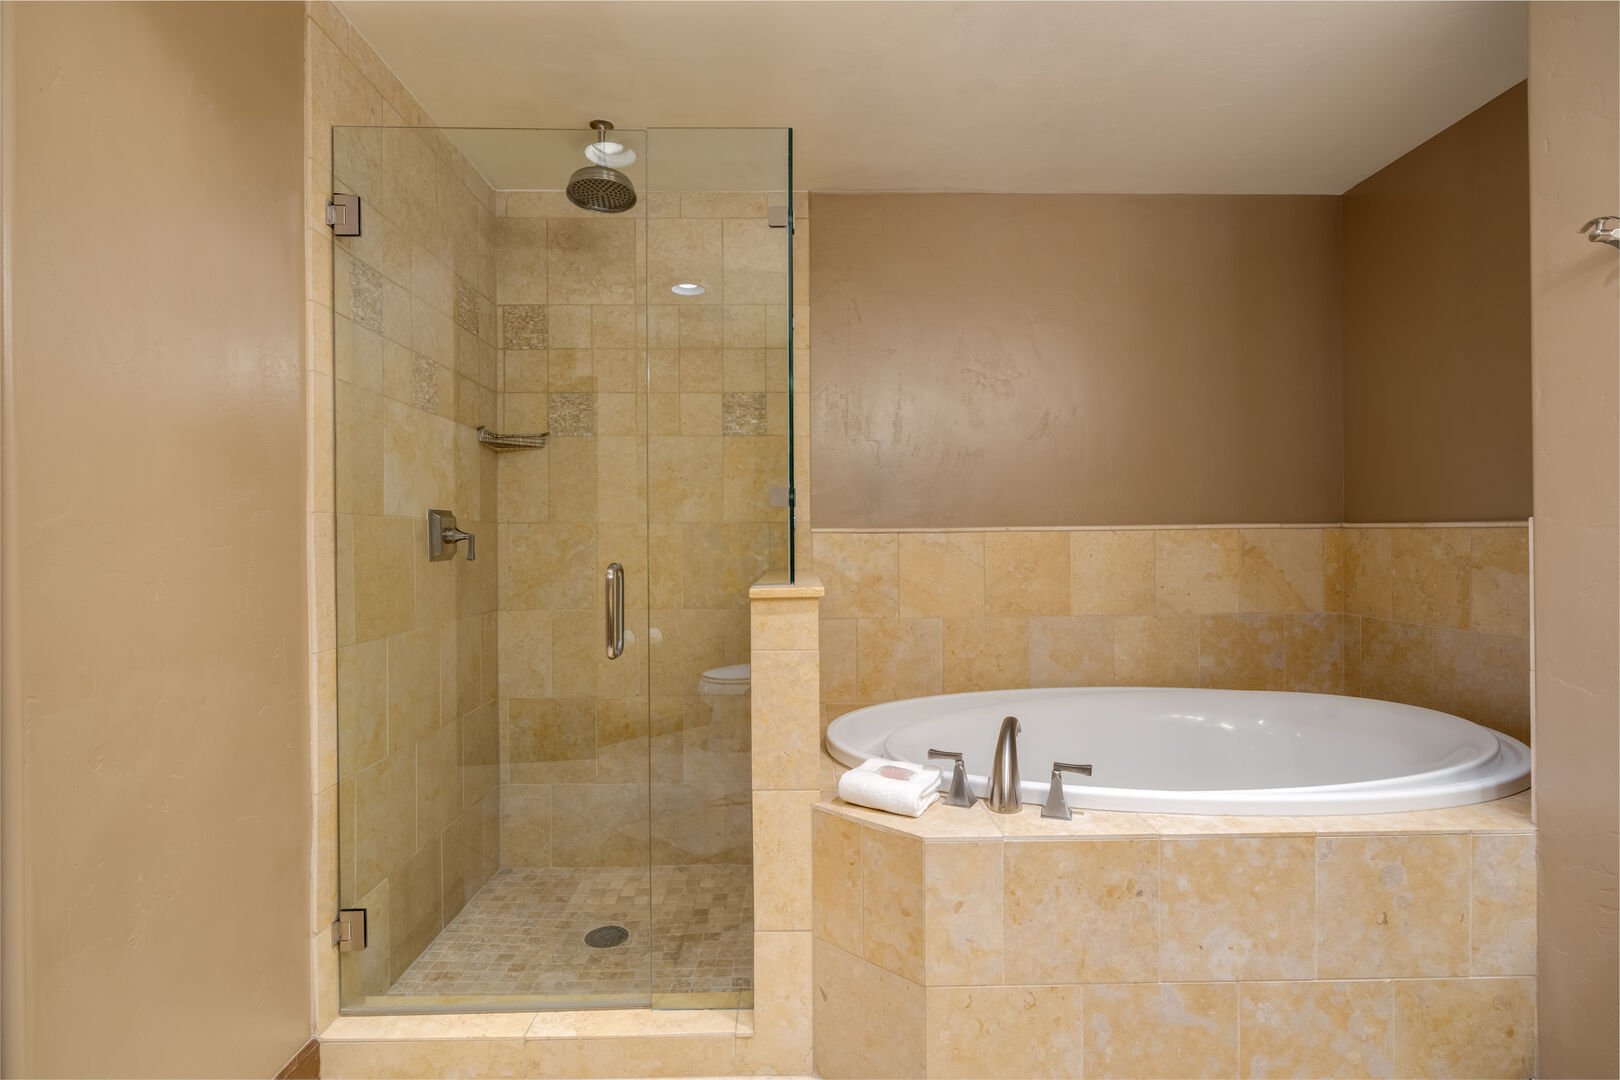 Soaker tub and large standing shower